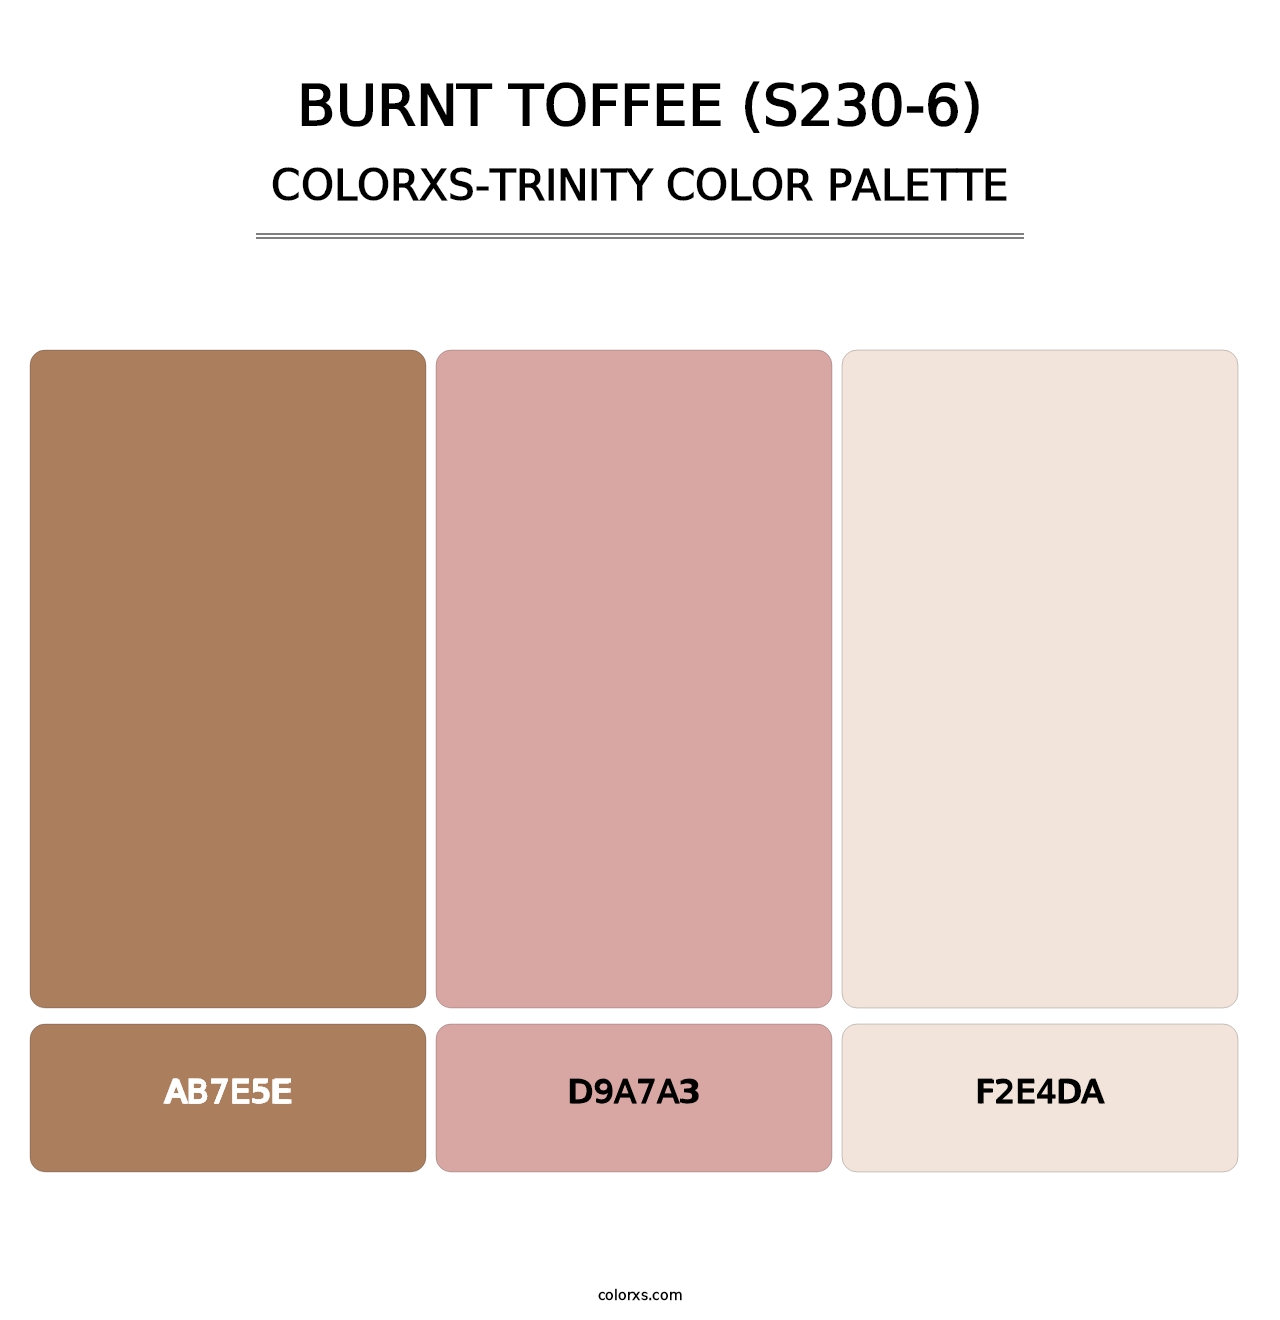 Burnt Toffee (S230-6) - Colorxs Trinity Palette